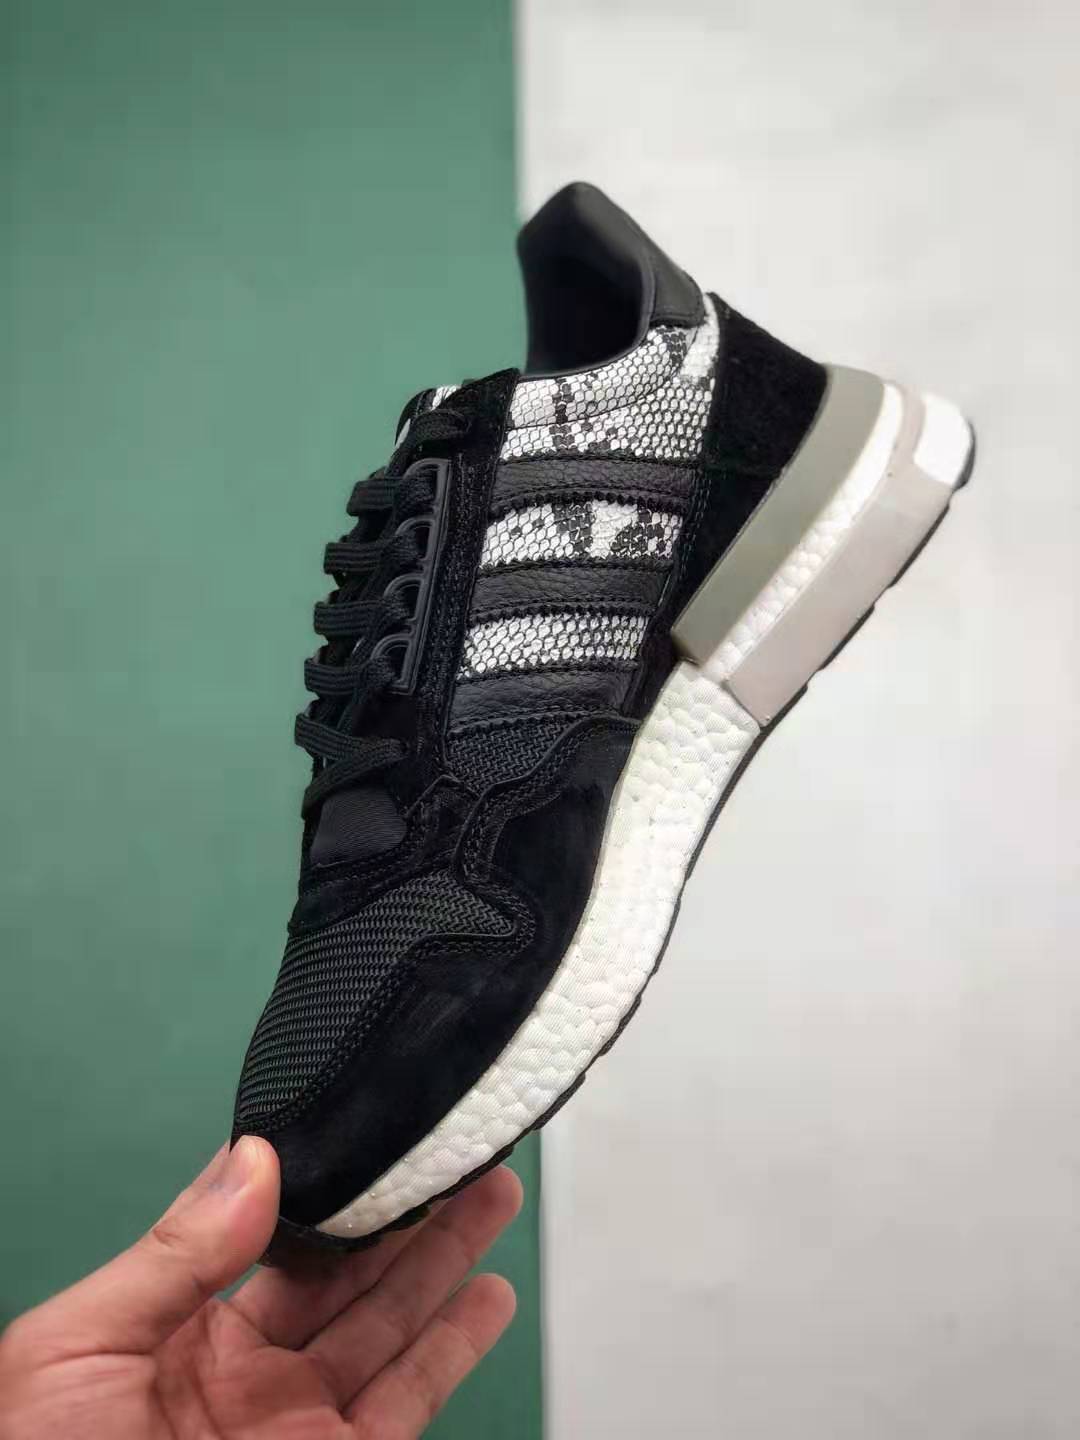 Adidas ZX 500 RM 'Snakeskin' BD7924 - Stylish and Trendy Sneakers